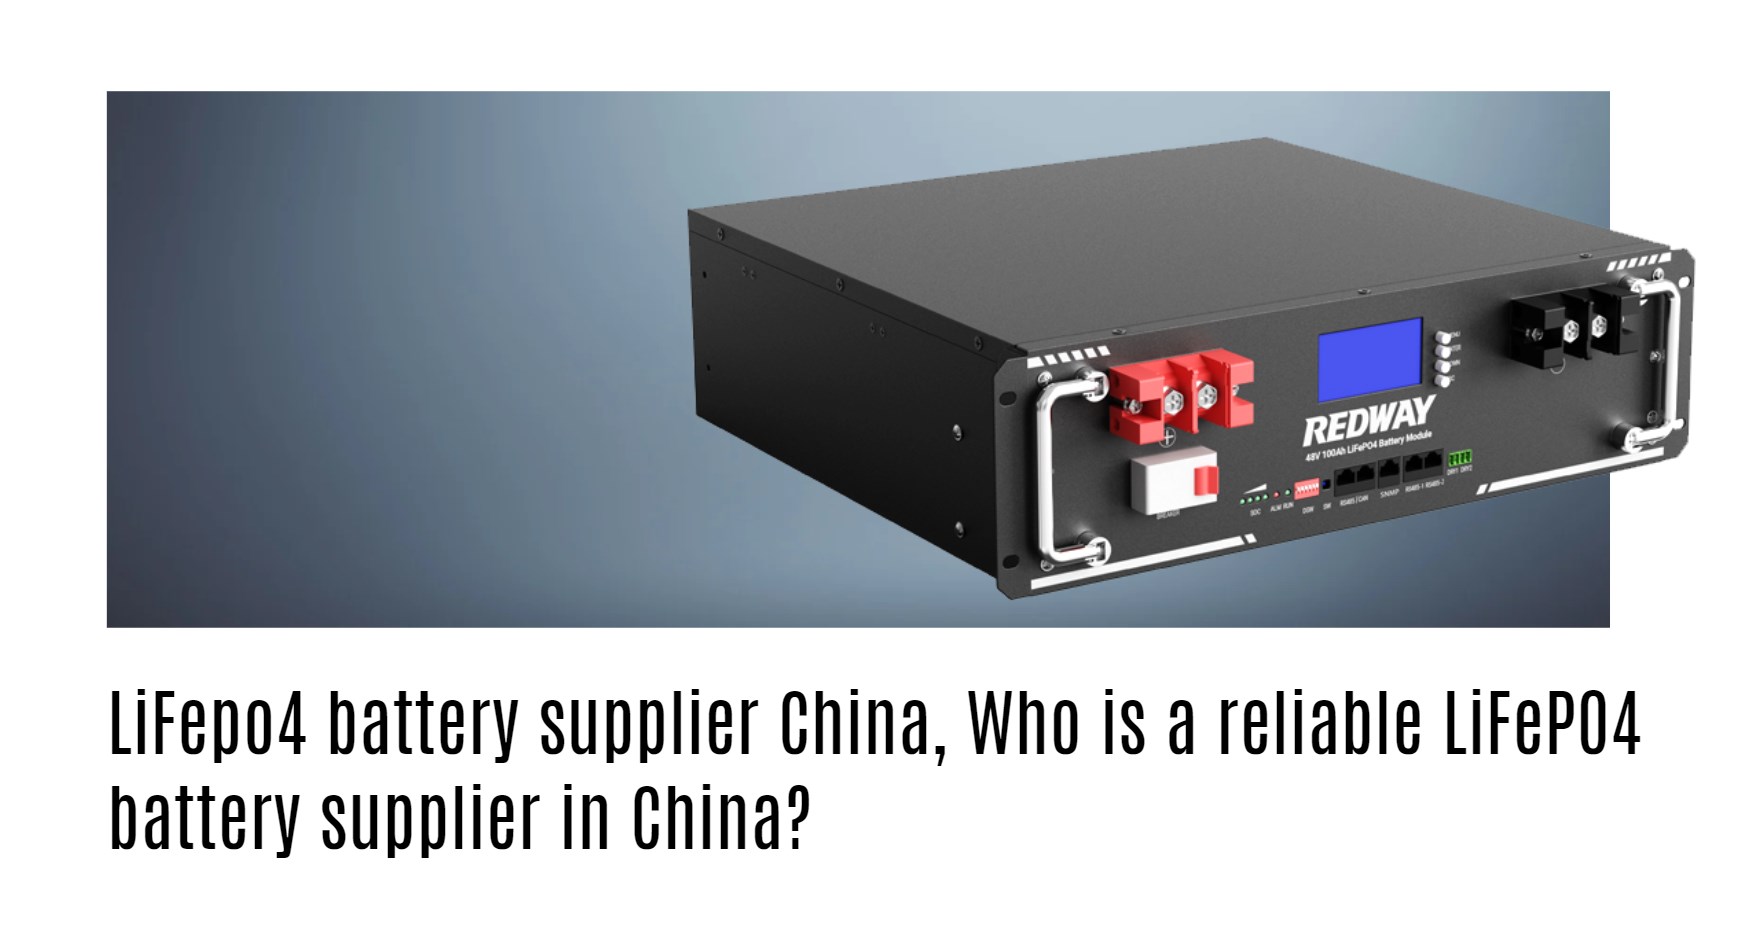 LiFepo4 battery supplier China, Who is a reliable LiFePO4 battery supplier in China?